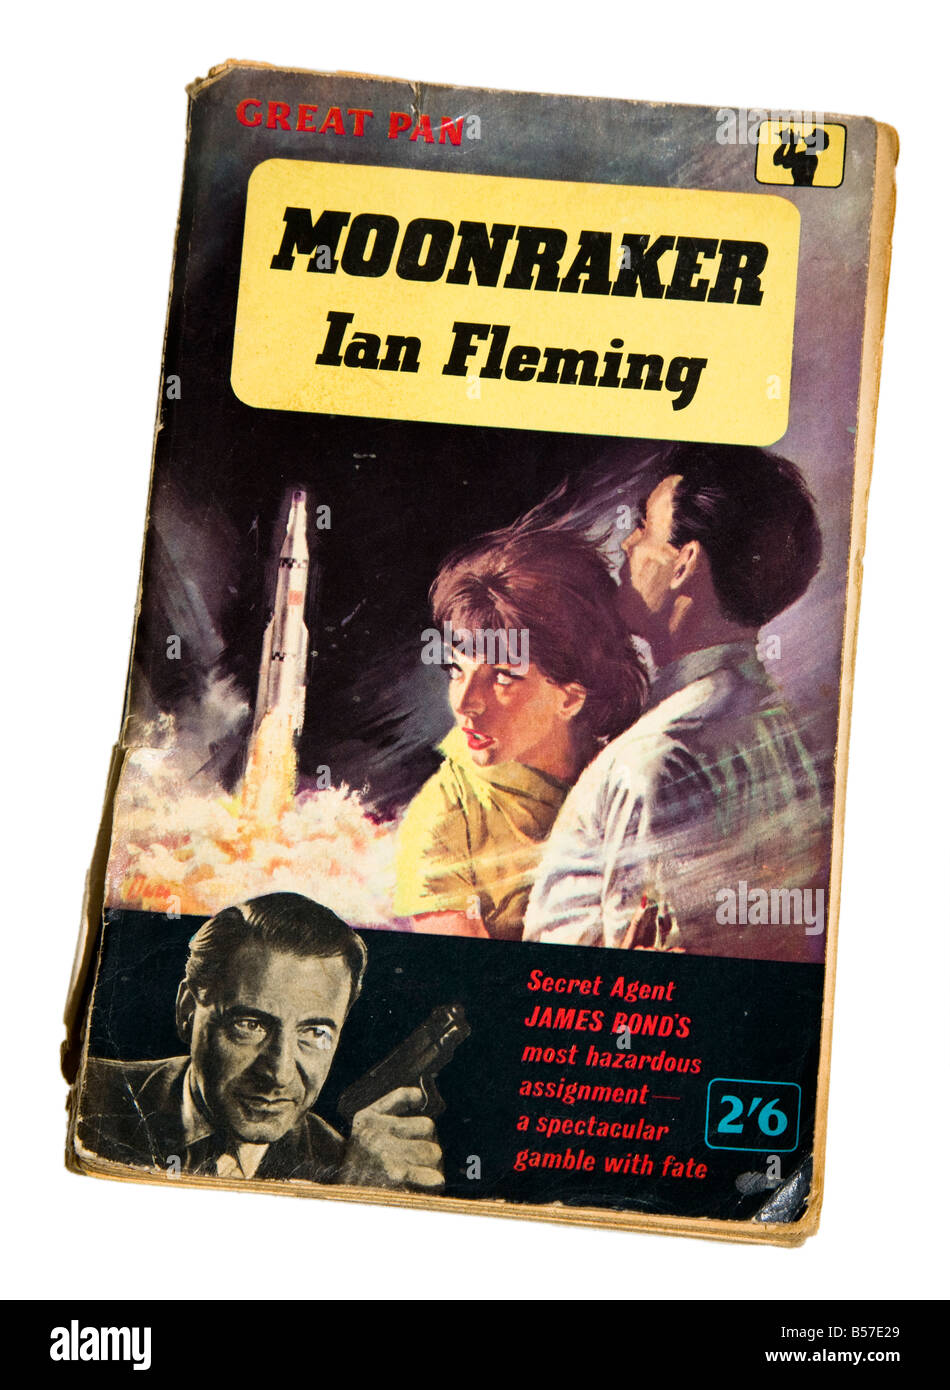 Cover of early edition James Bond book 1955 Moonraker paperback edition Stock Photo